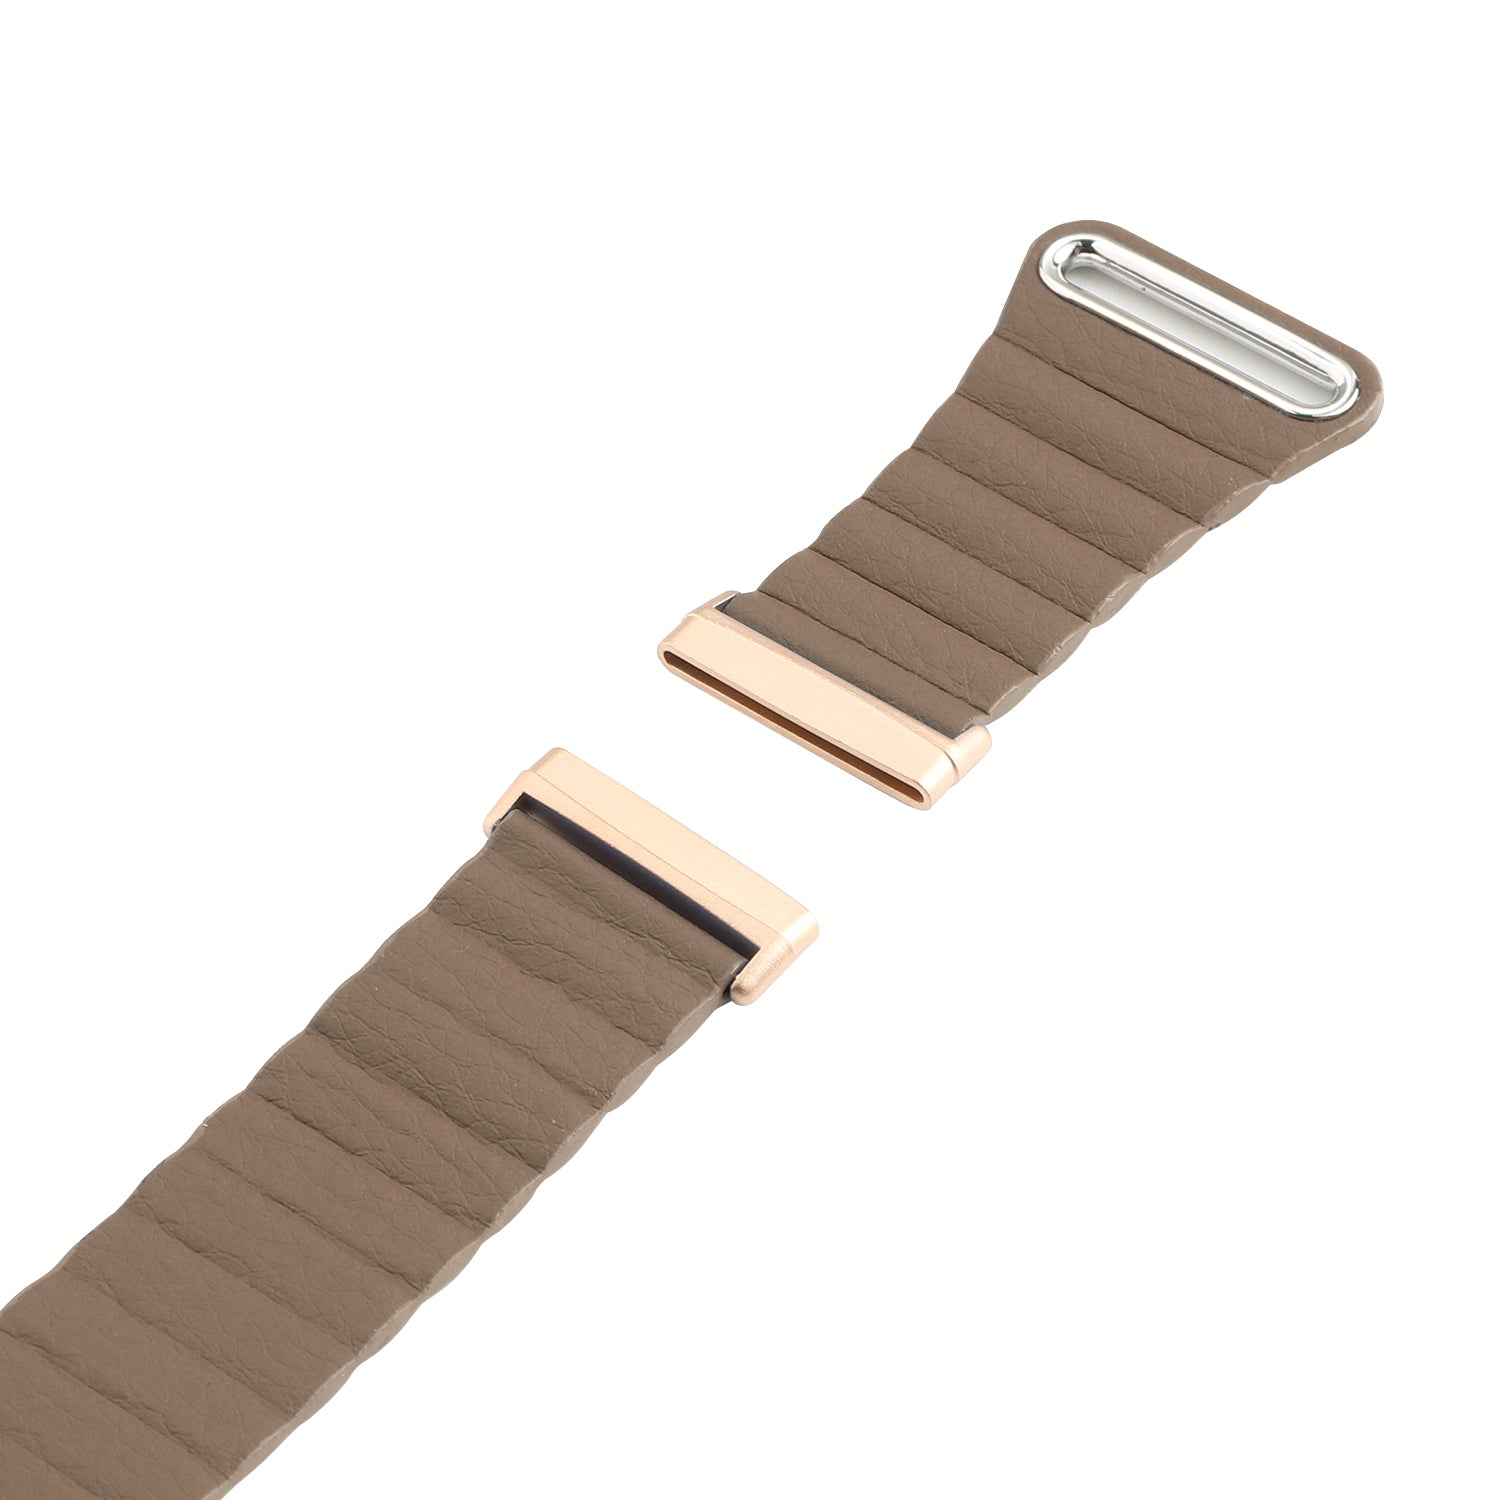 Genuine Leather Watchband Replacement 22mm for Fitbit Versa 3 - Coffee